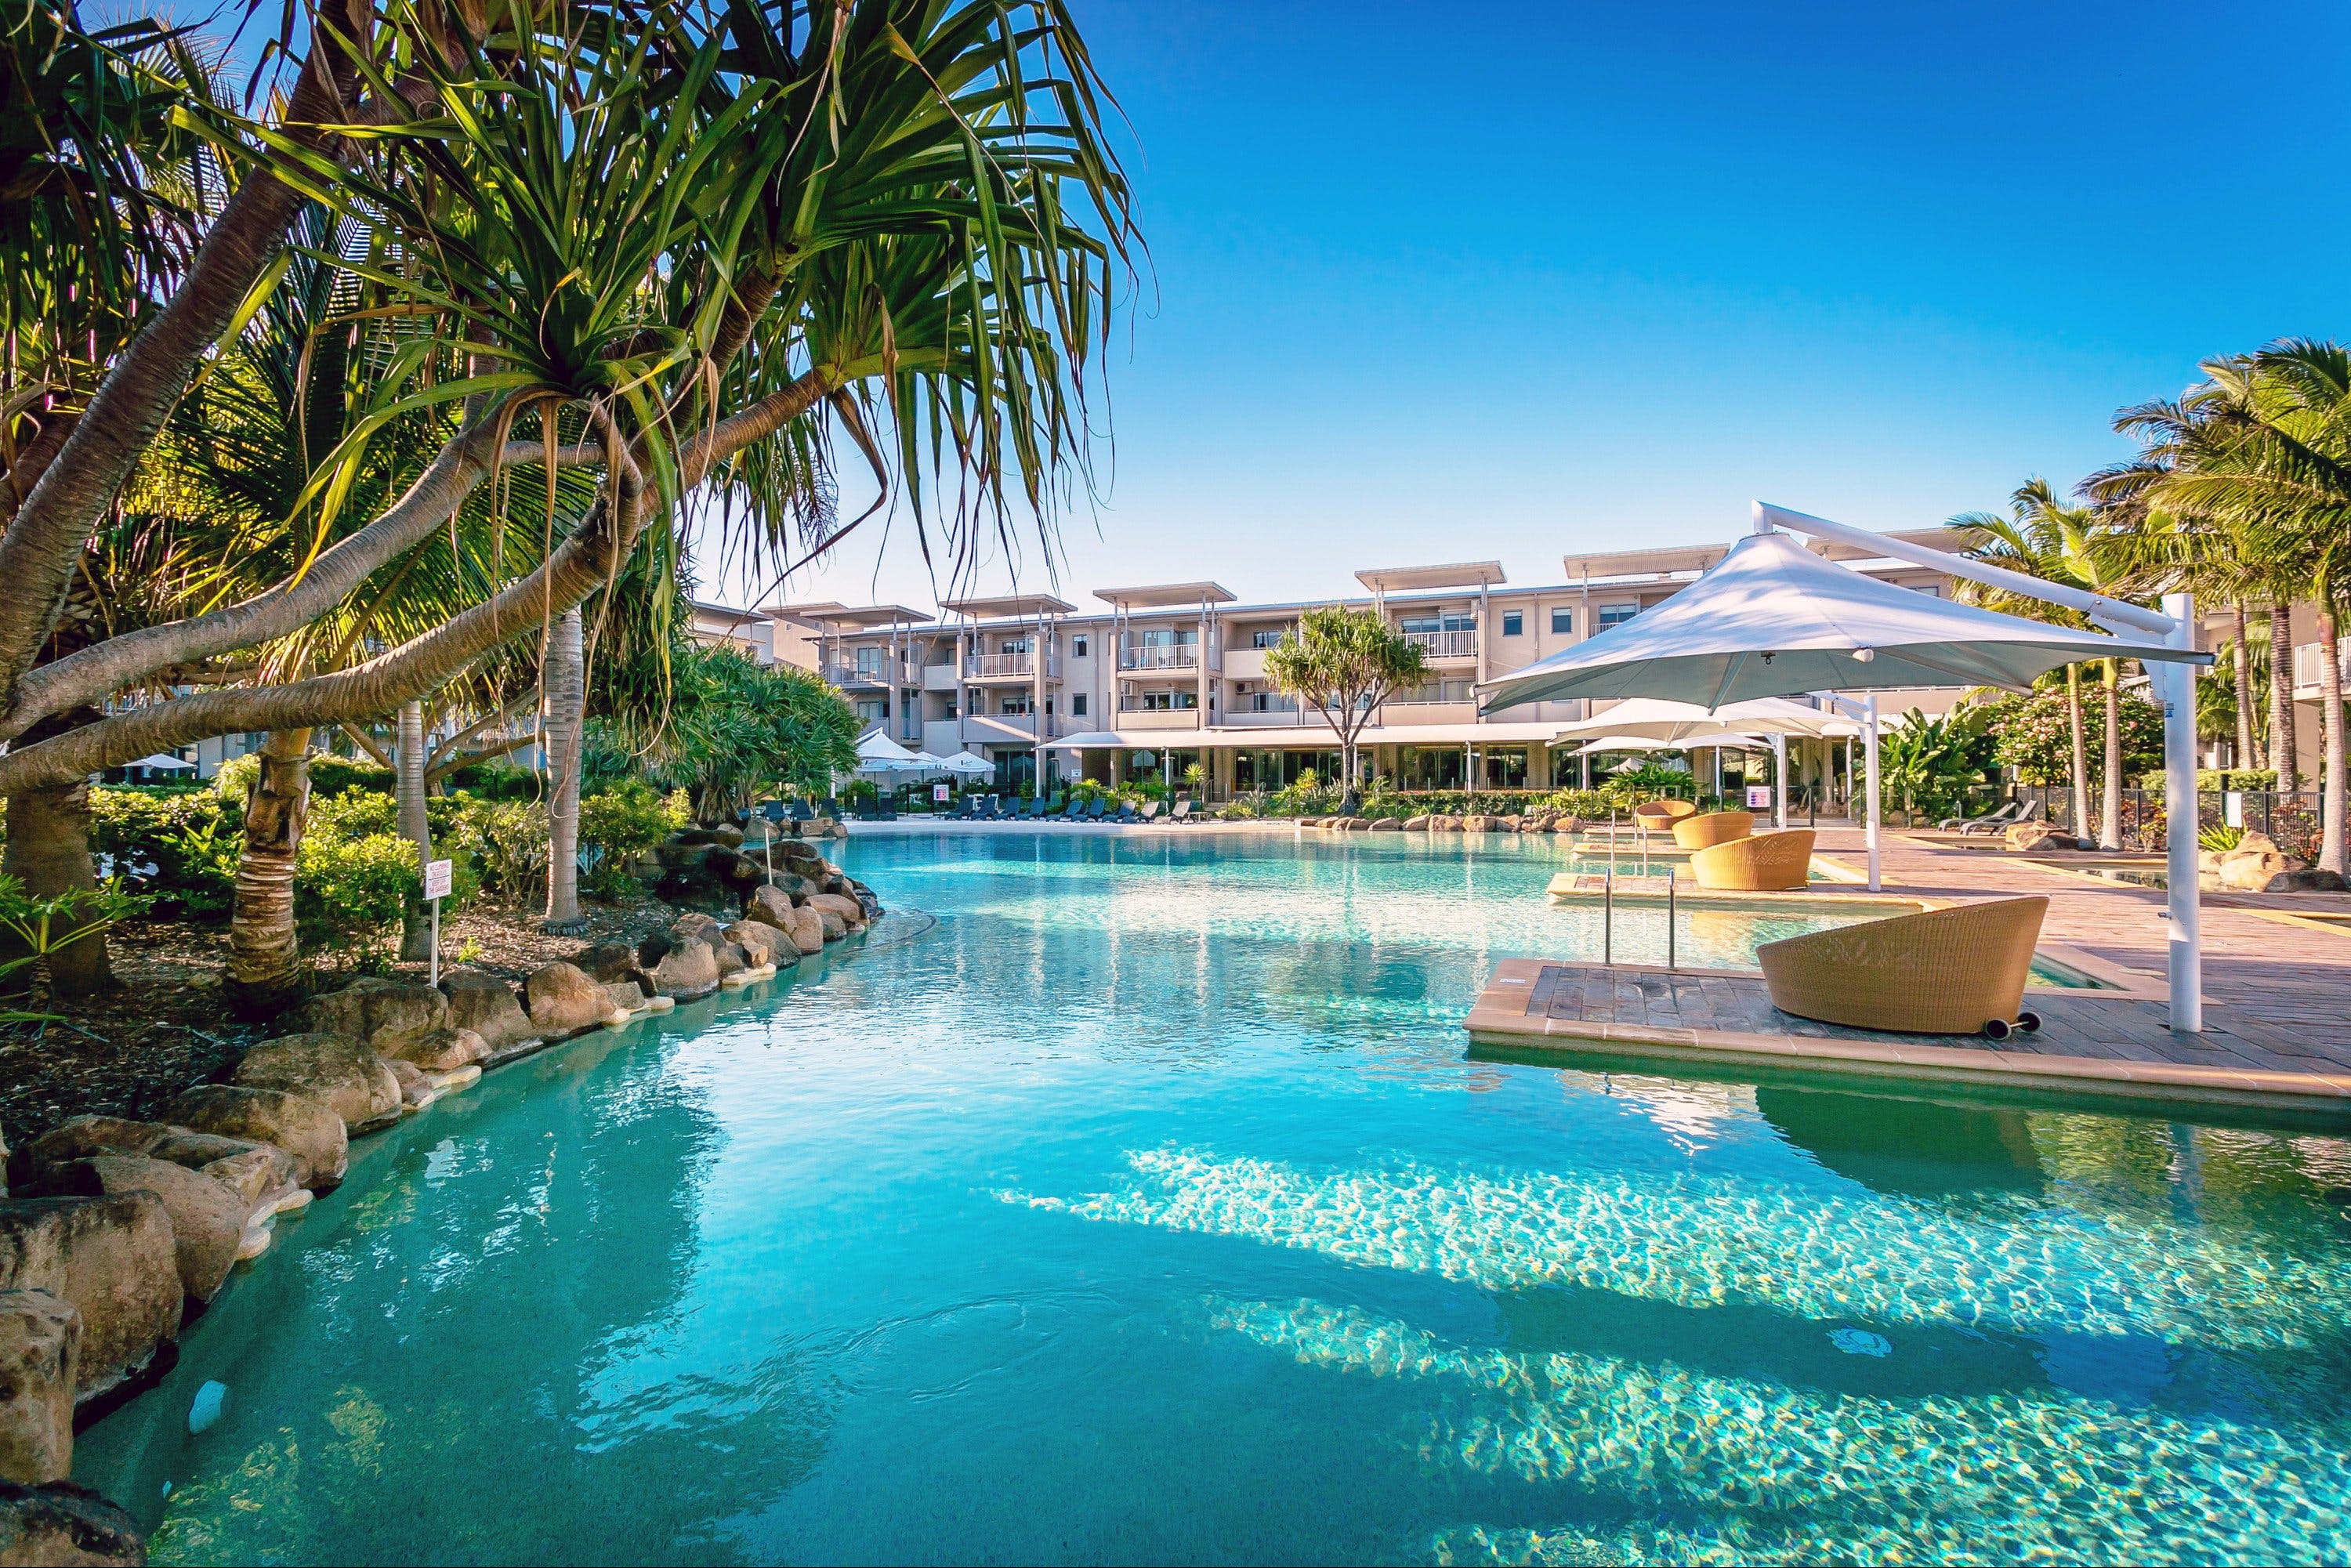 Peppers Salt Resort and Spa - Accommodation Airlie Beach